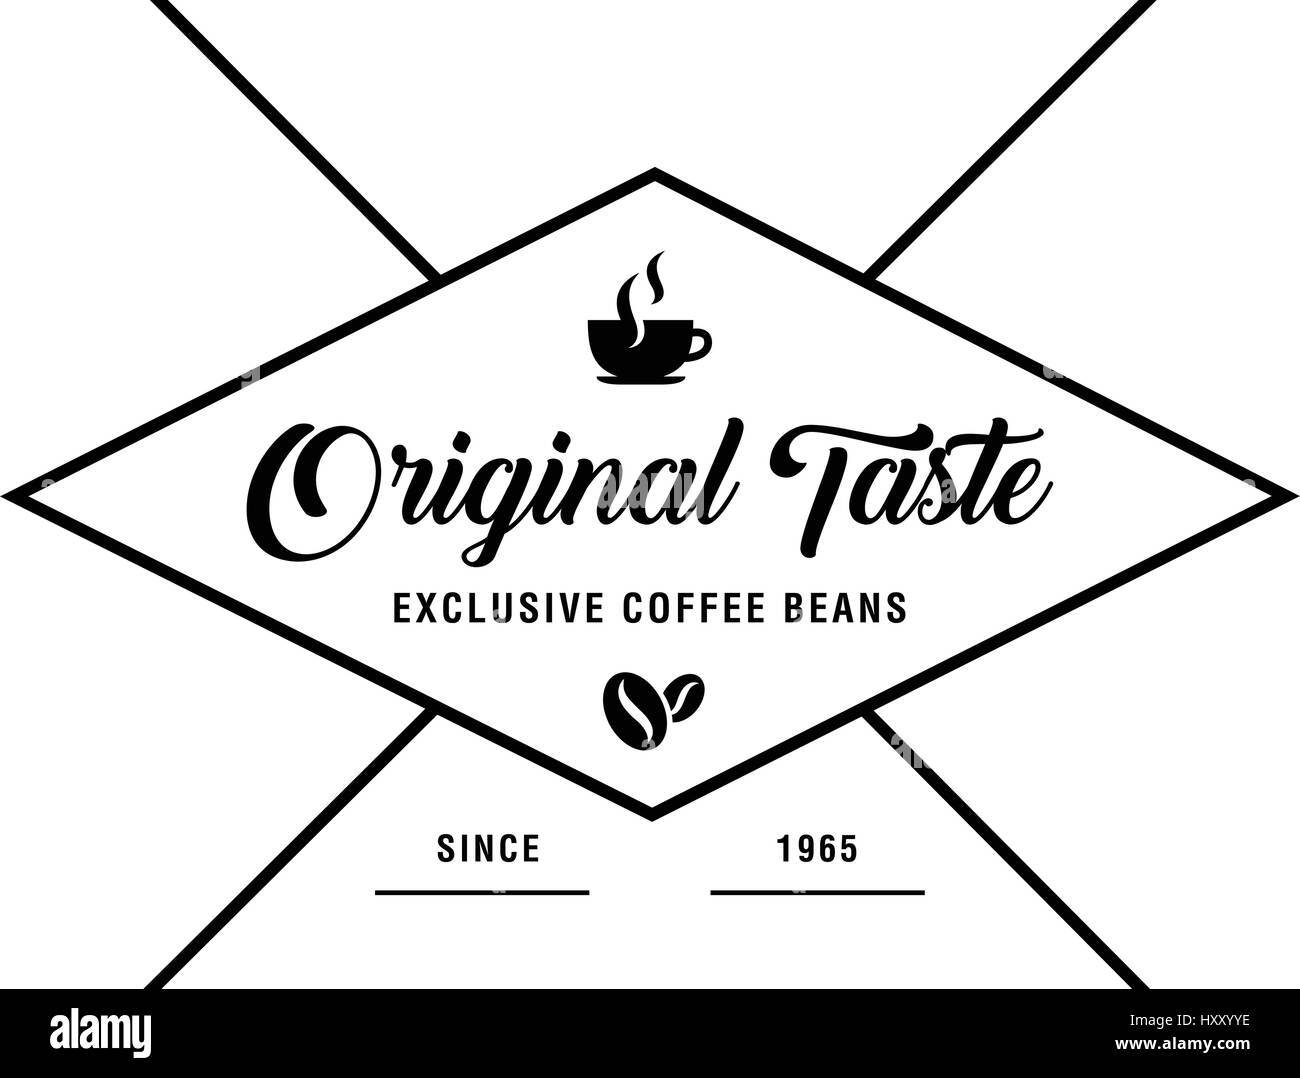 Coffee Shop Logo, Cup, beans, vintage style objects Stock Vector